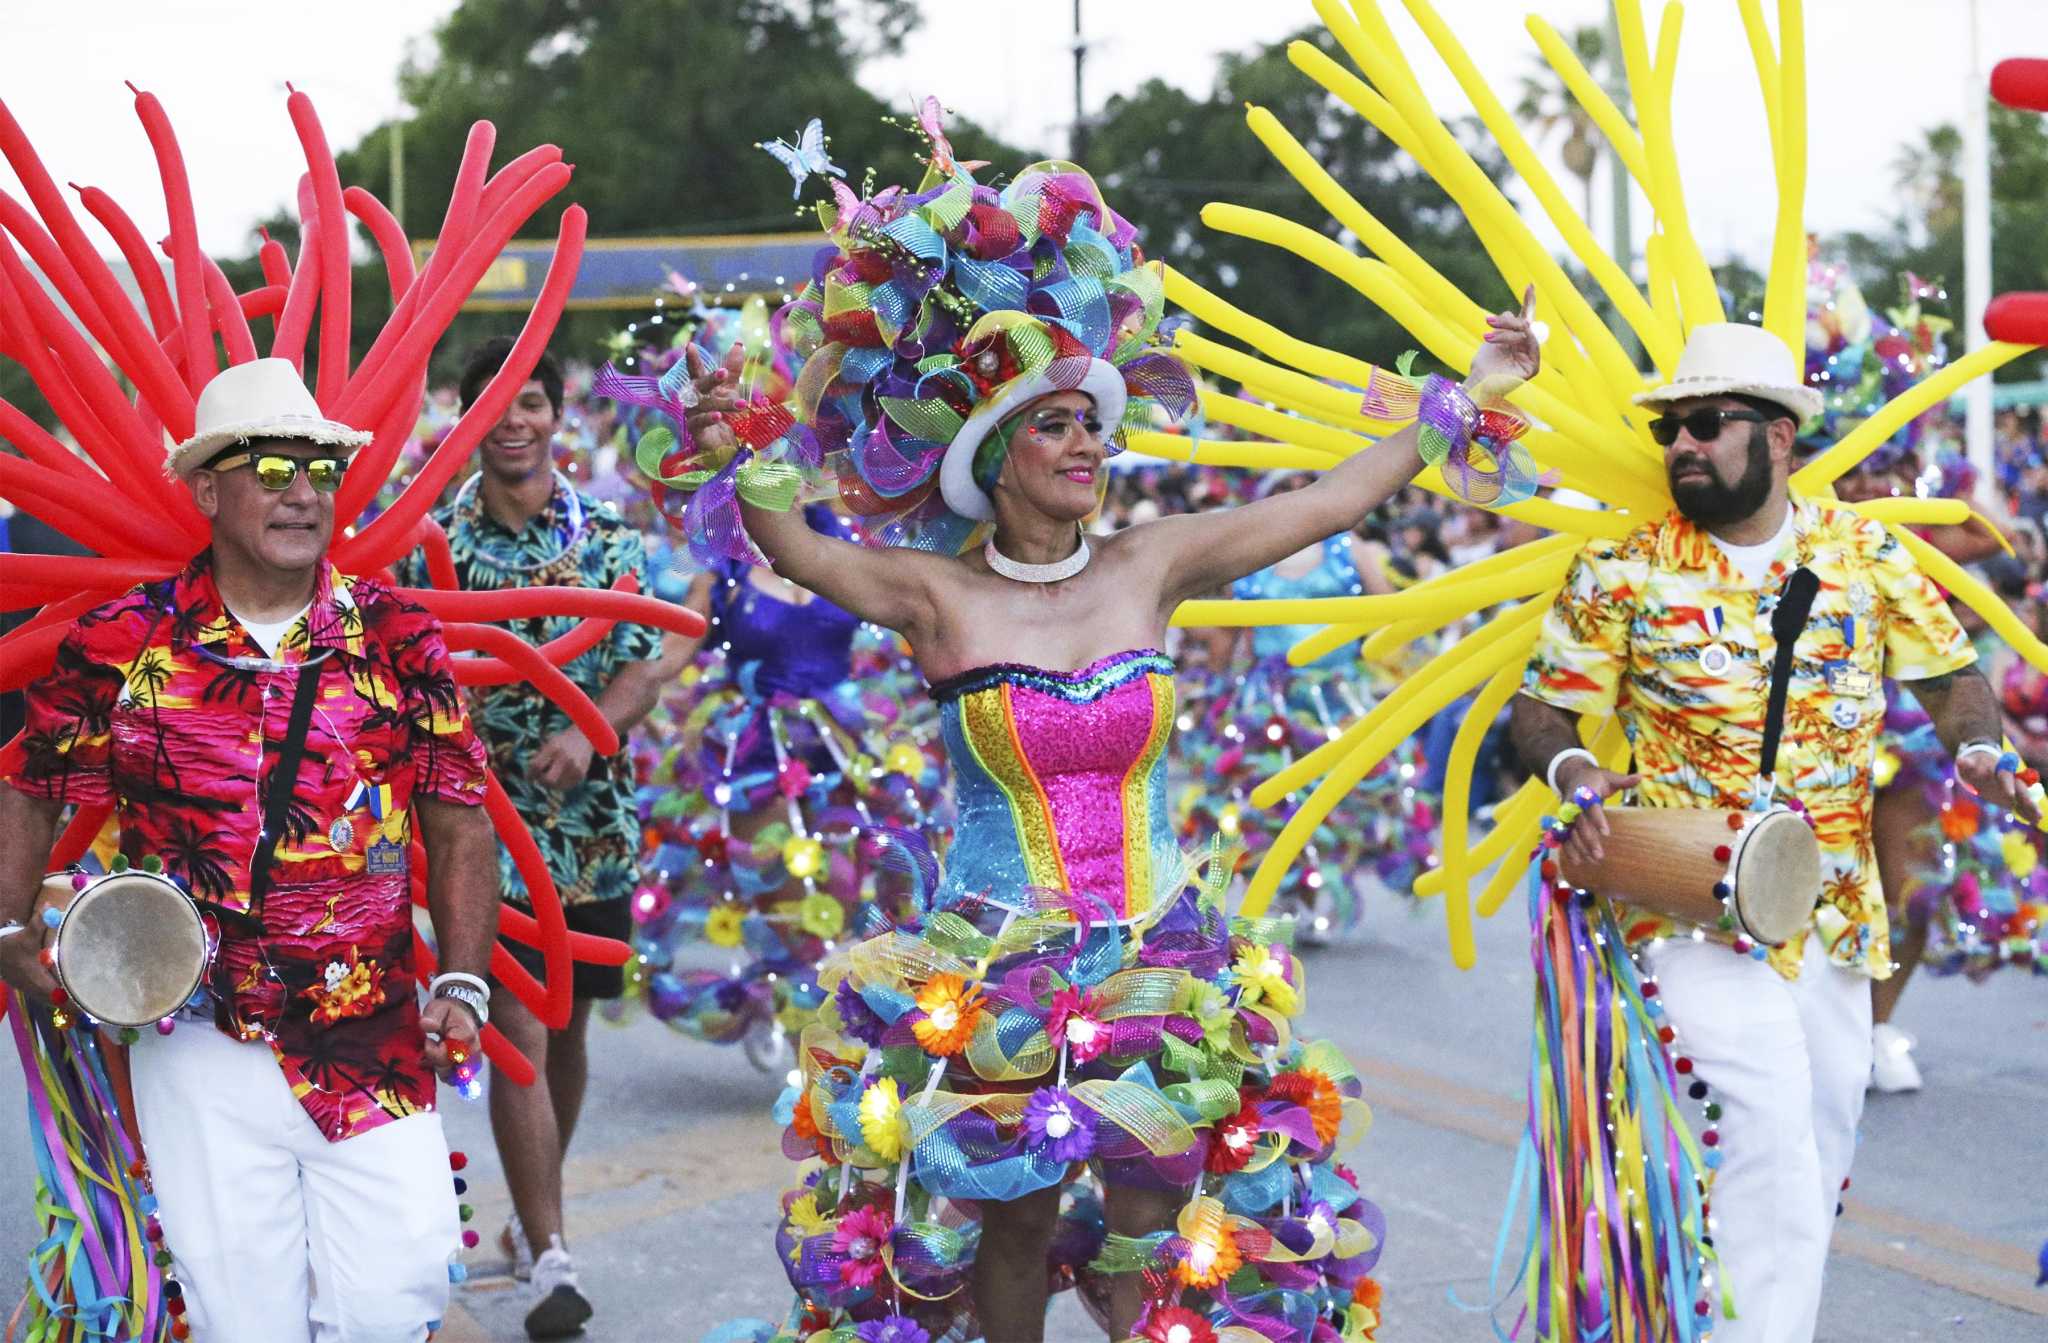 San Antonio's best bars to crawl along the 2023 Fiesta parade route